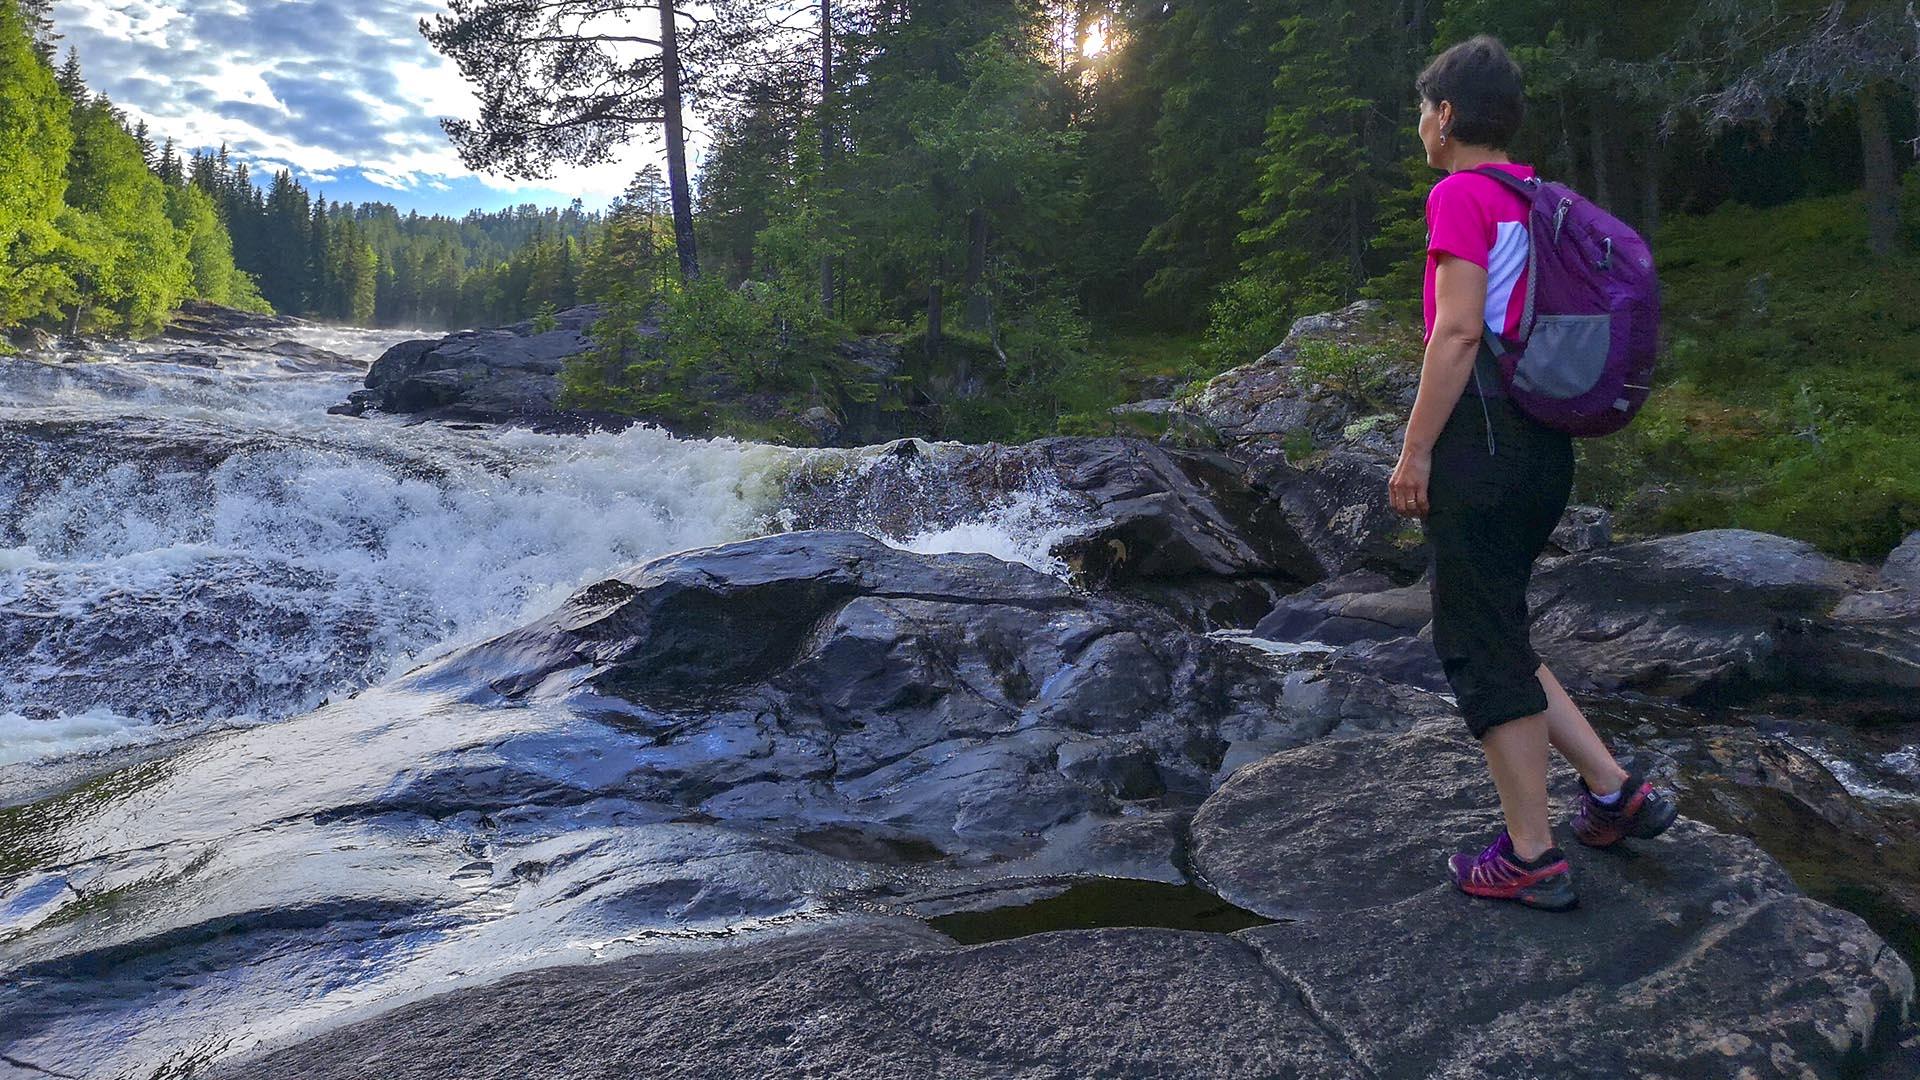 A woman is standing on flat rocks by a river with fast rapids in a forest